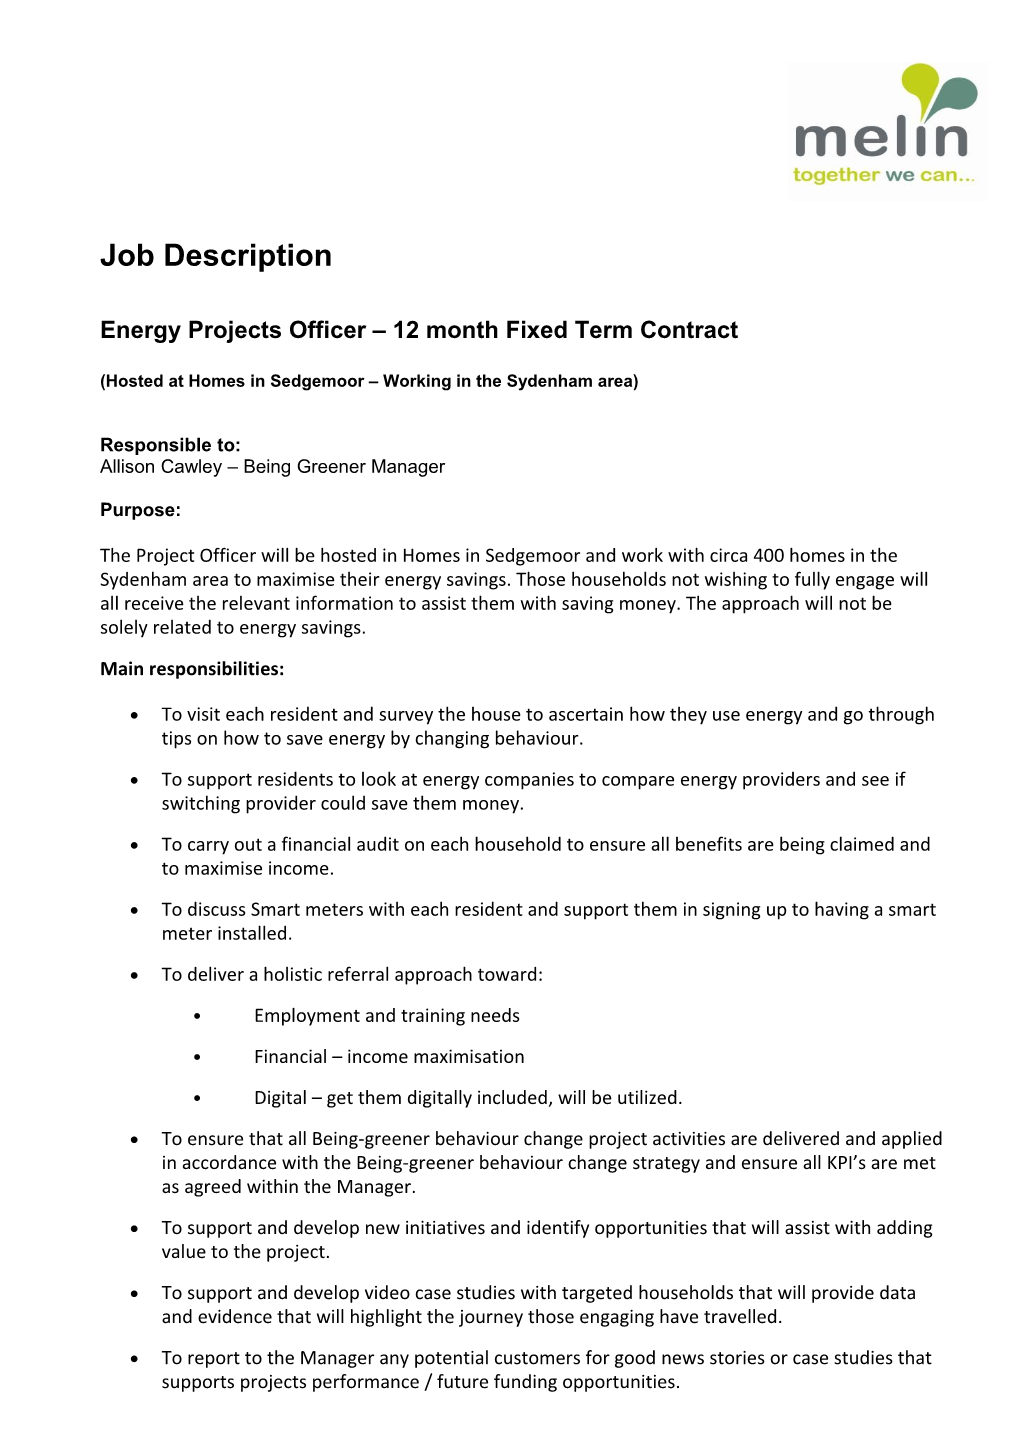 Energy Projects Officer 12 Month Fixed Term Contract